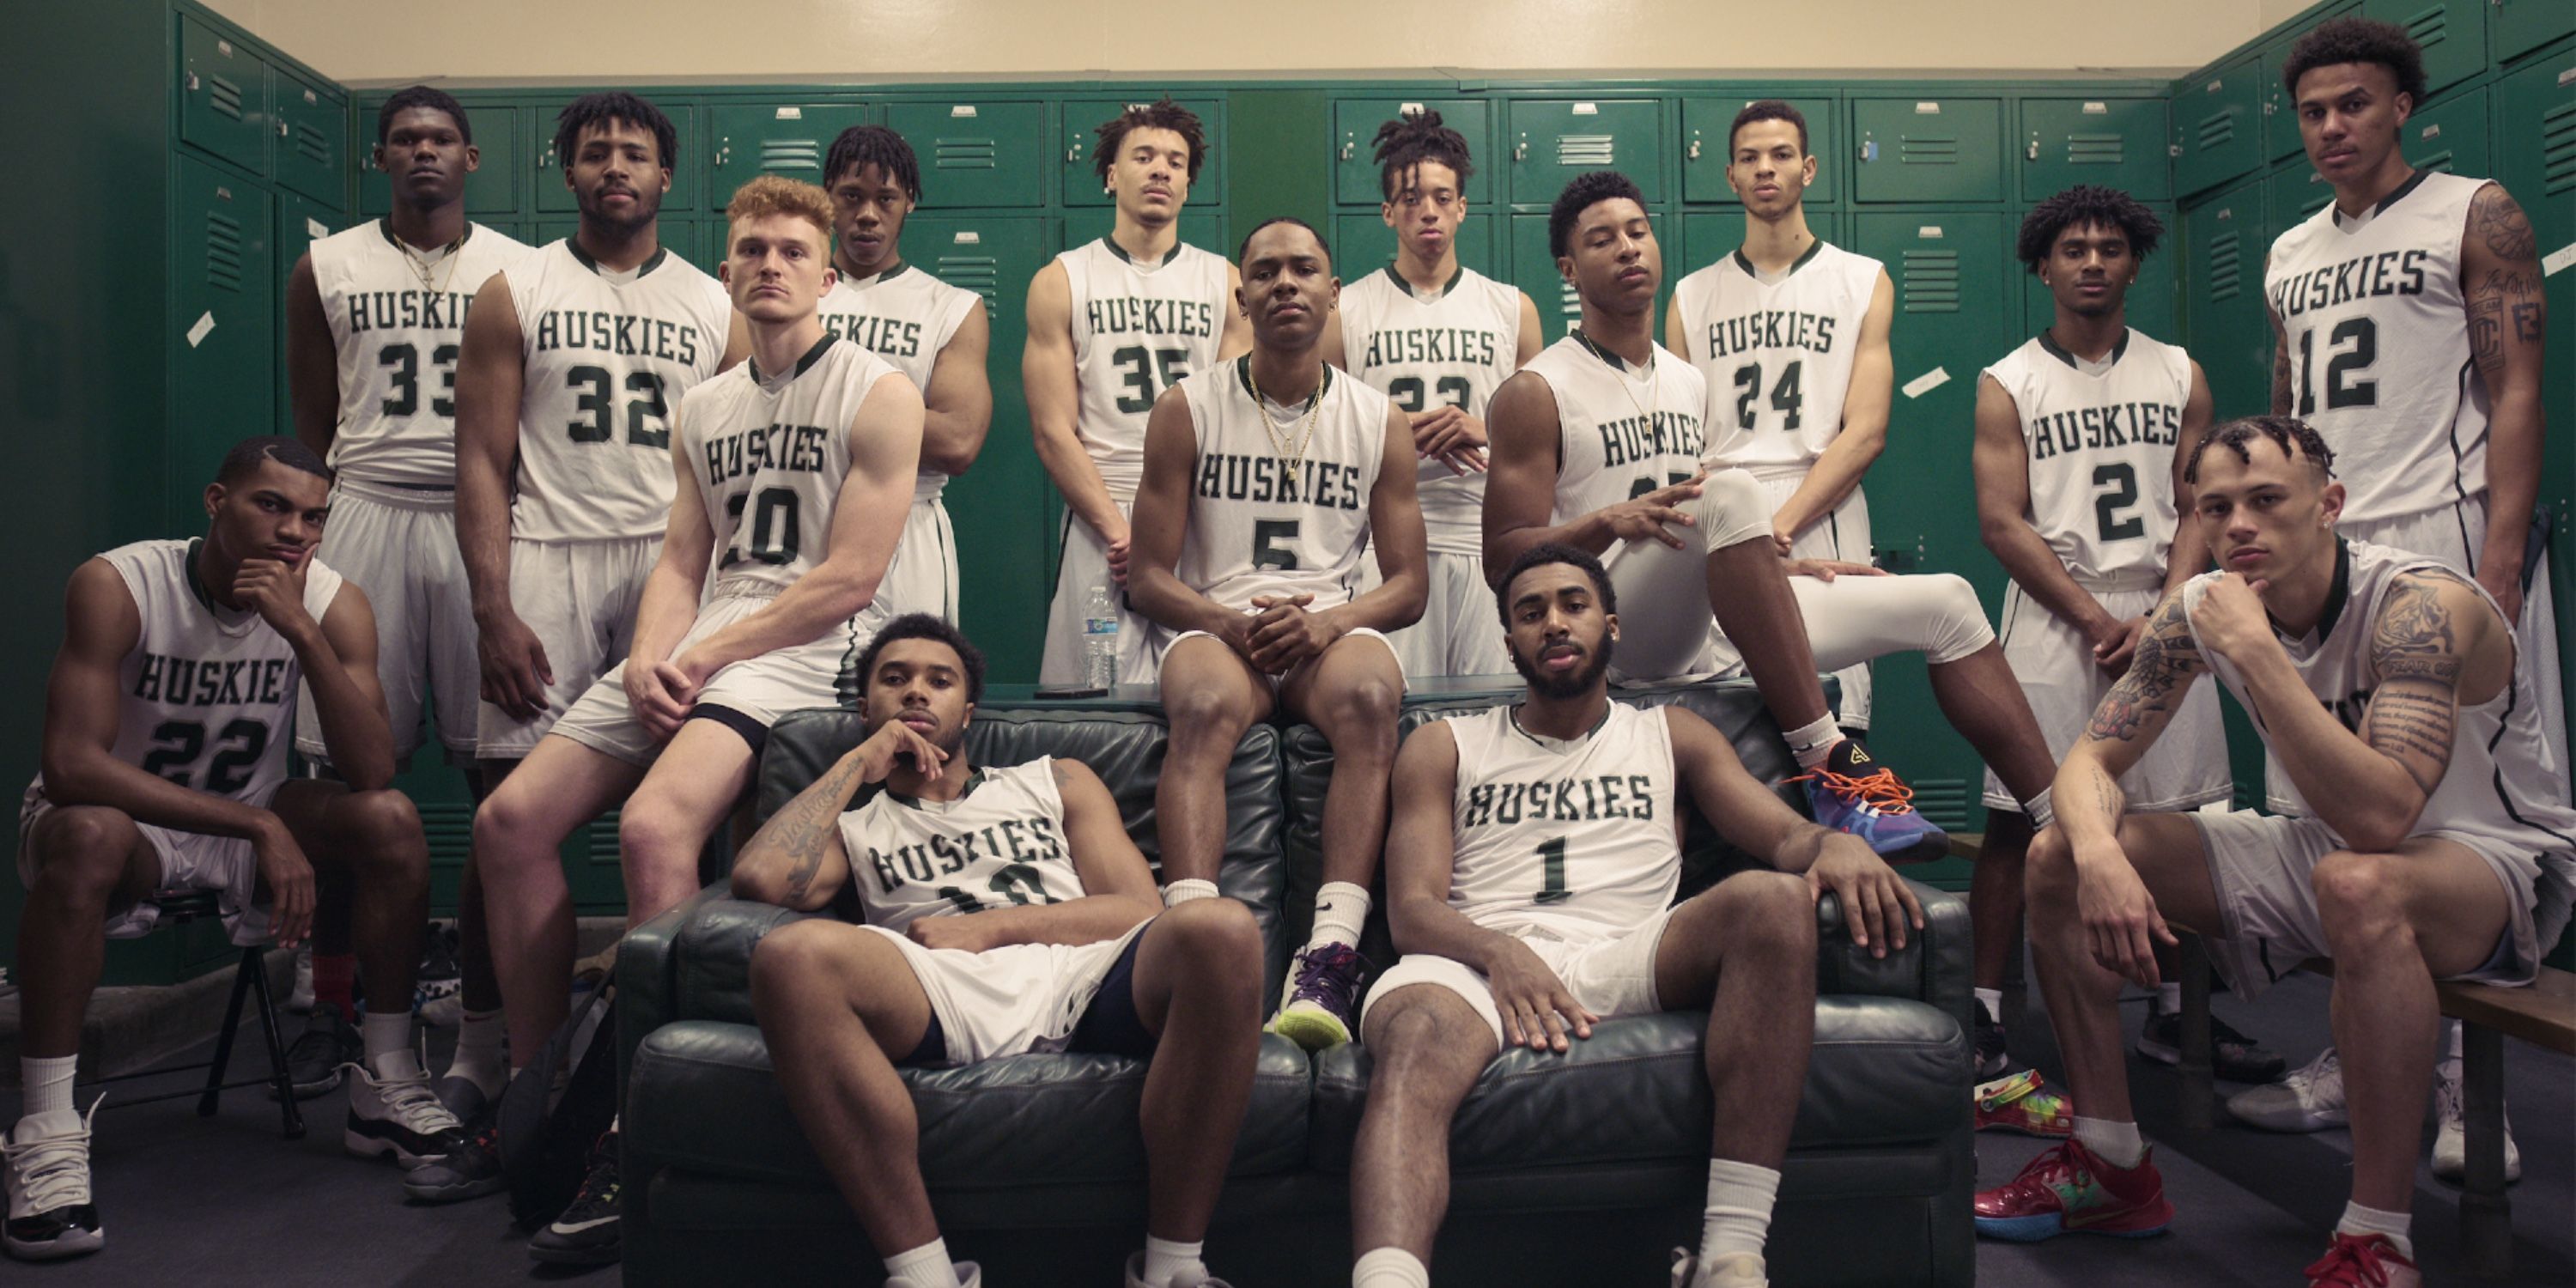 The basketball team poses in Last Chance U: Basketball on Netflix